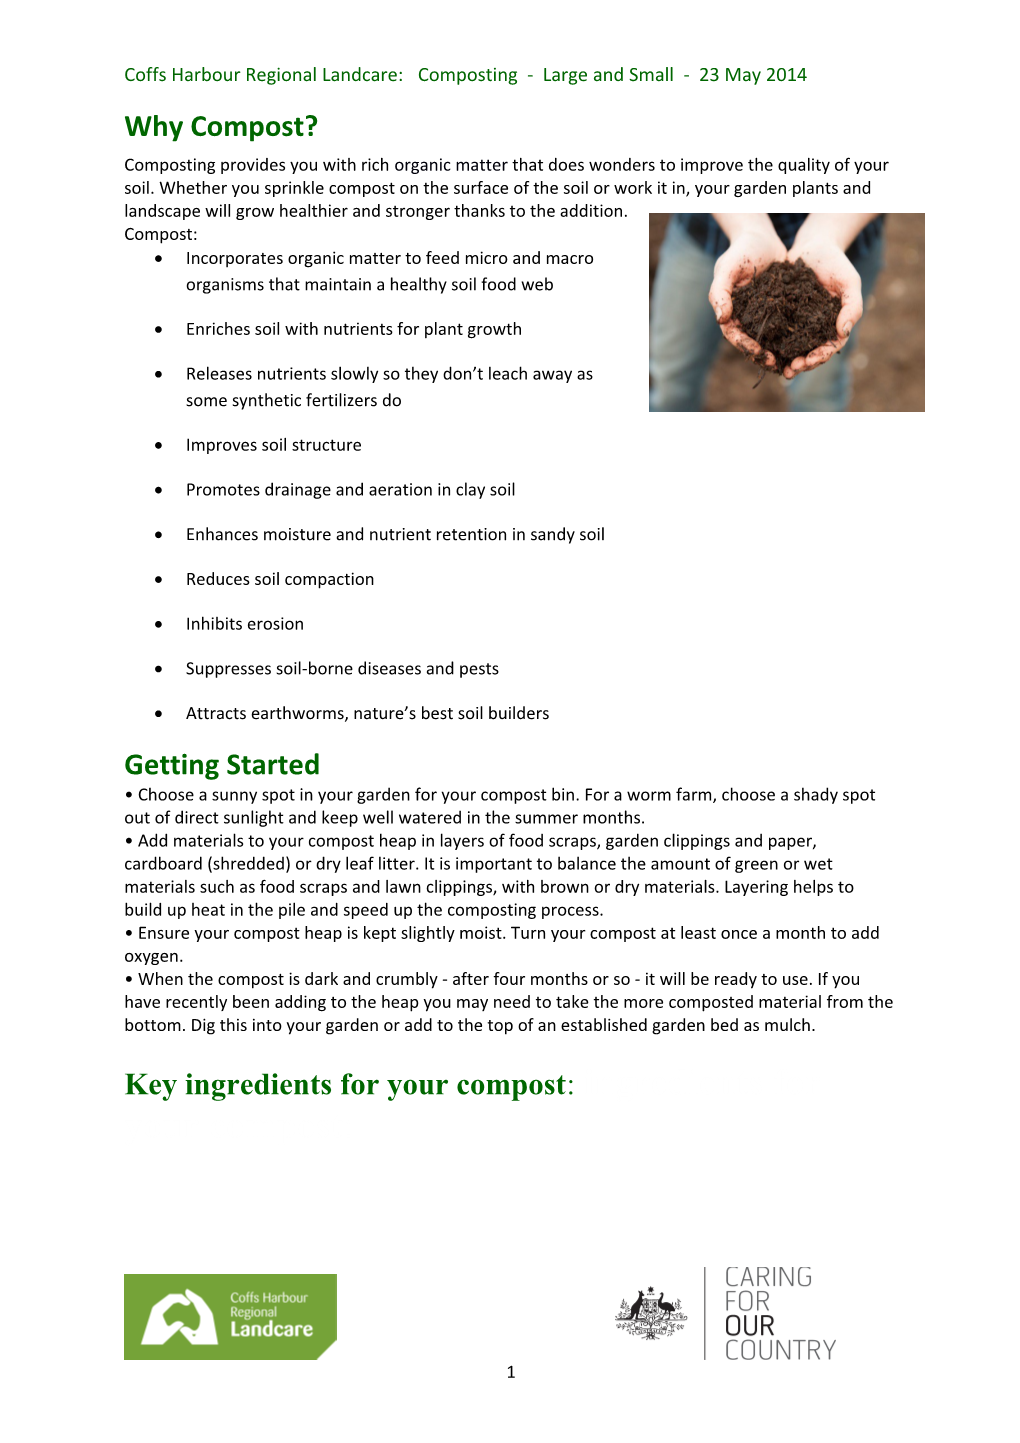 Coffs Harbour Regional Landcare: Composting - Large and Small - 23 May 2014